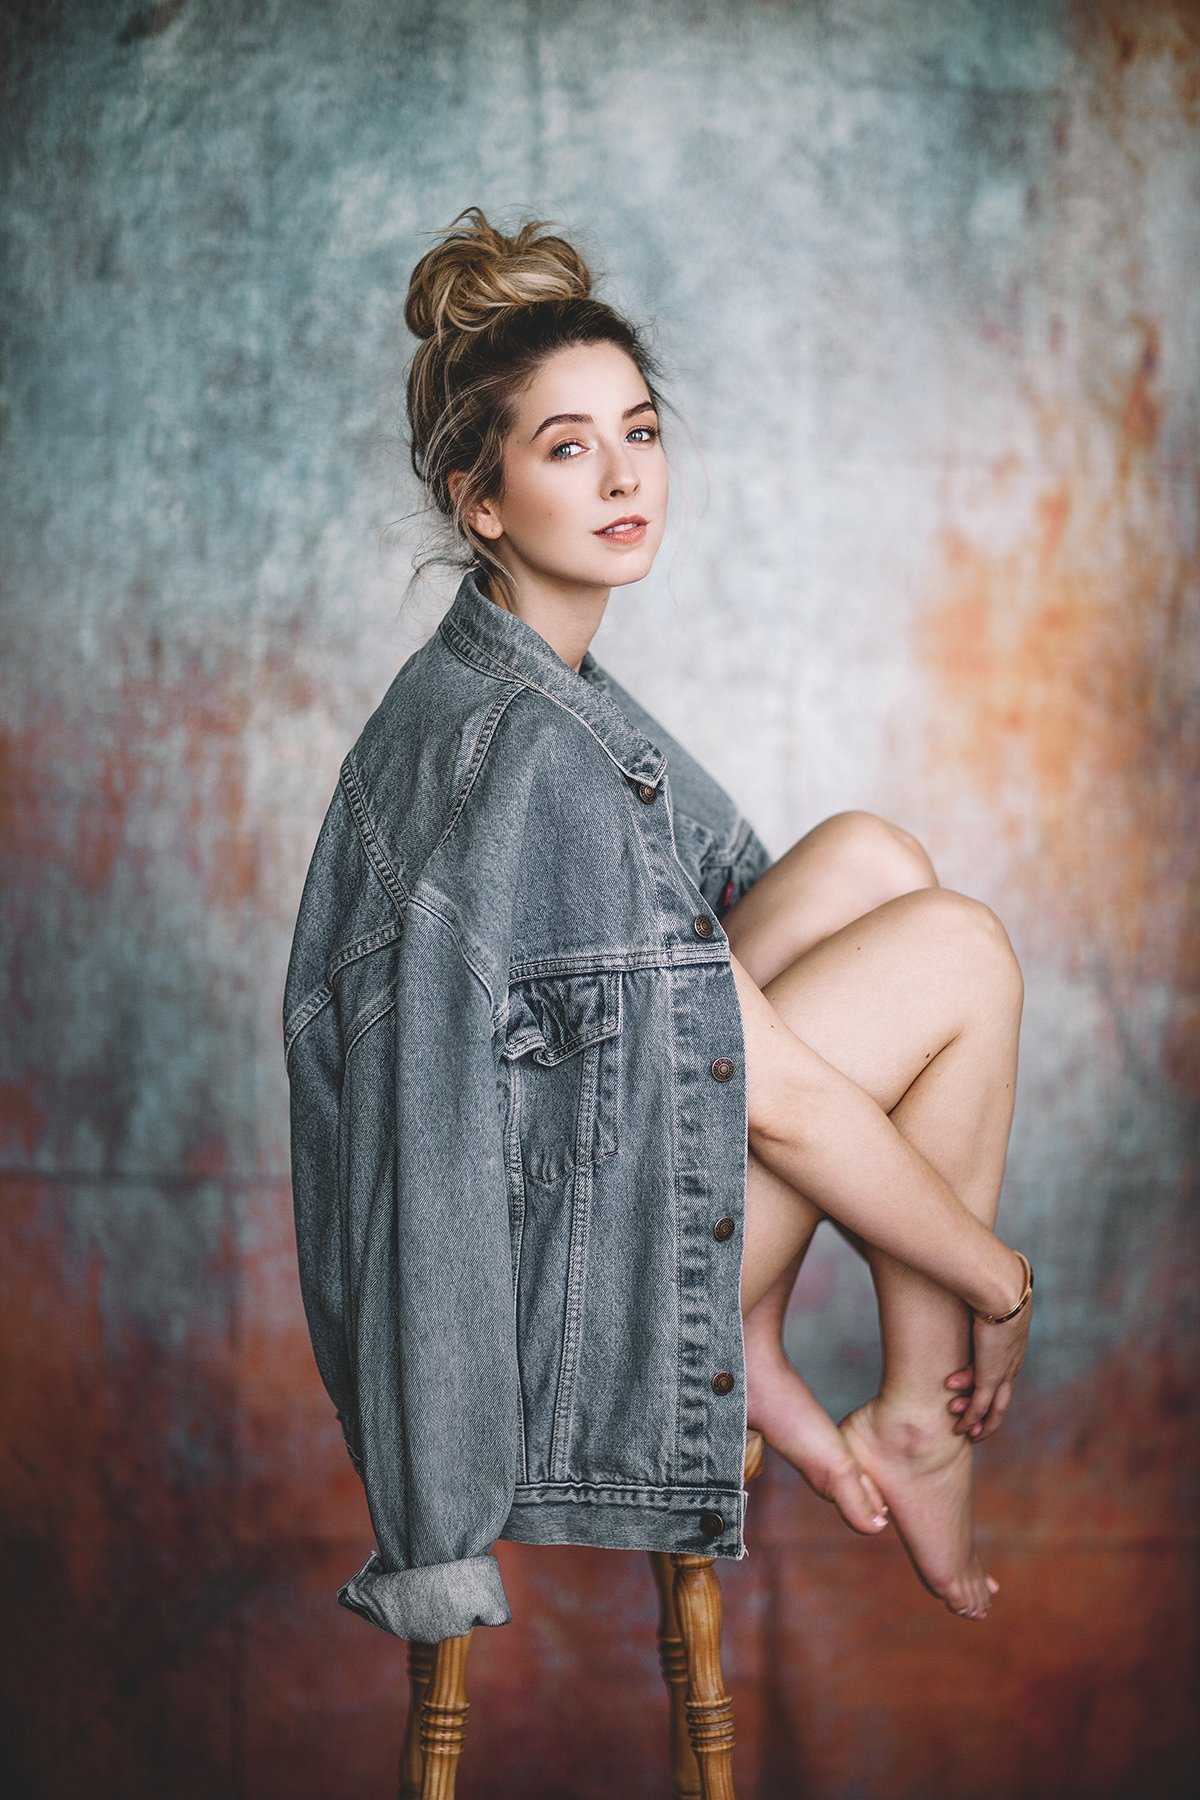 50 Nude Pictures Of Zoella Showcase Her Ideally Impressive Figure | Best Of Comic Books